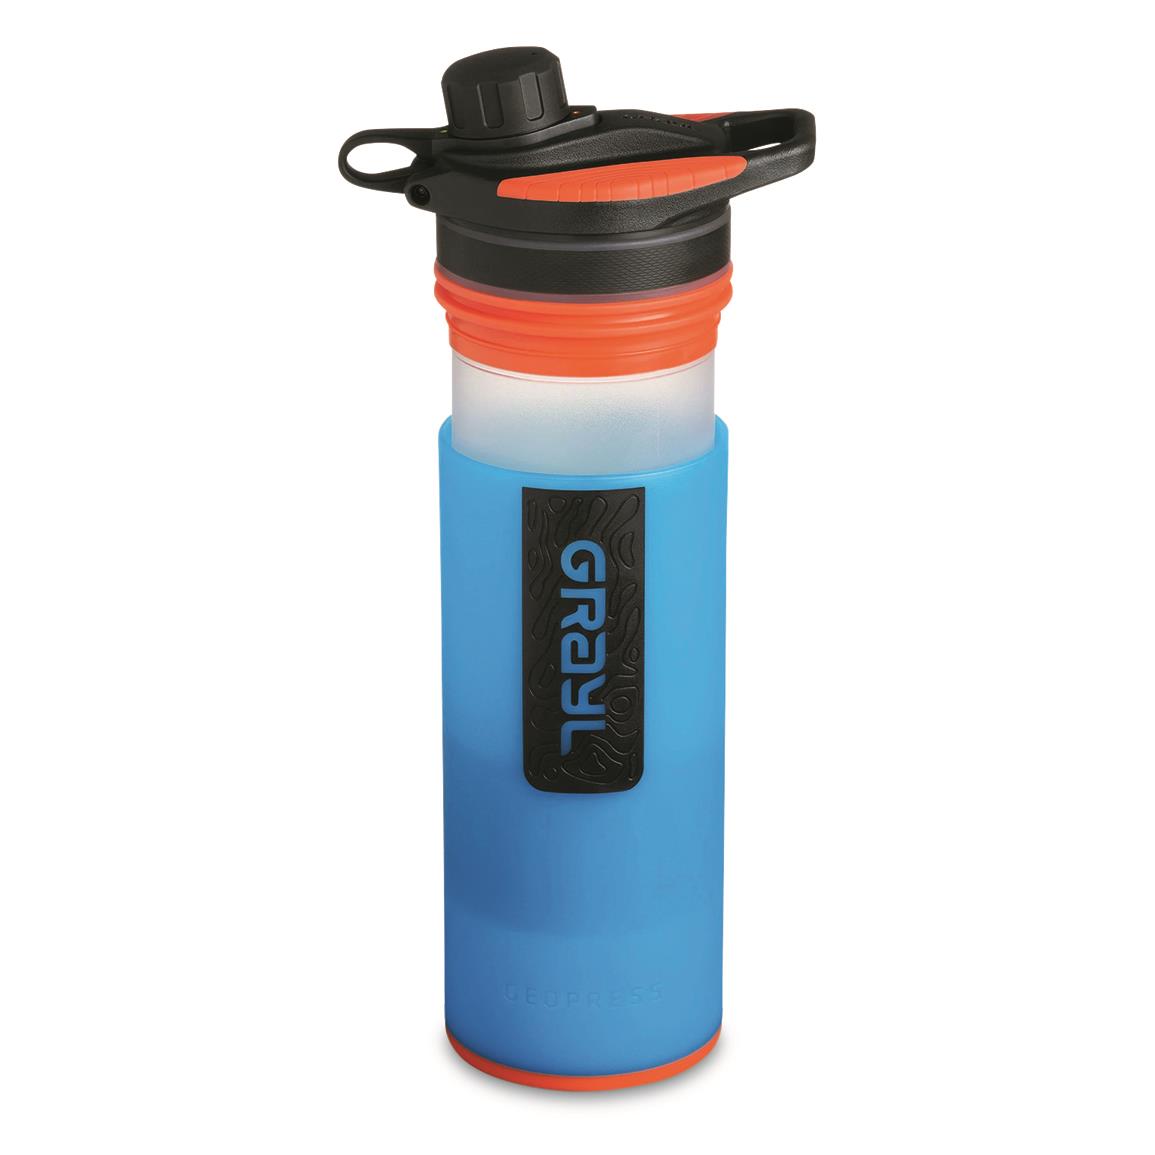 Reliance Jumbo-Tainer Water Container - 7 gal.